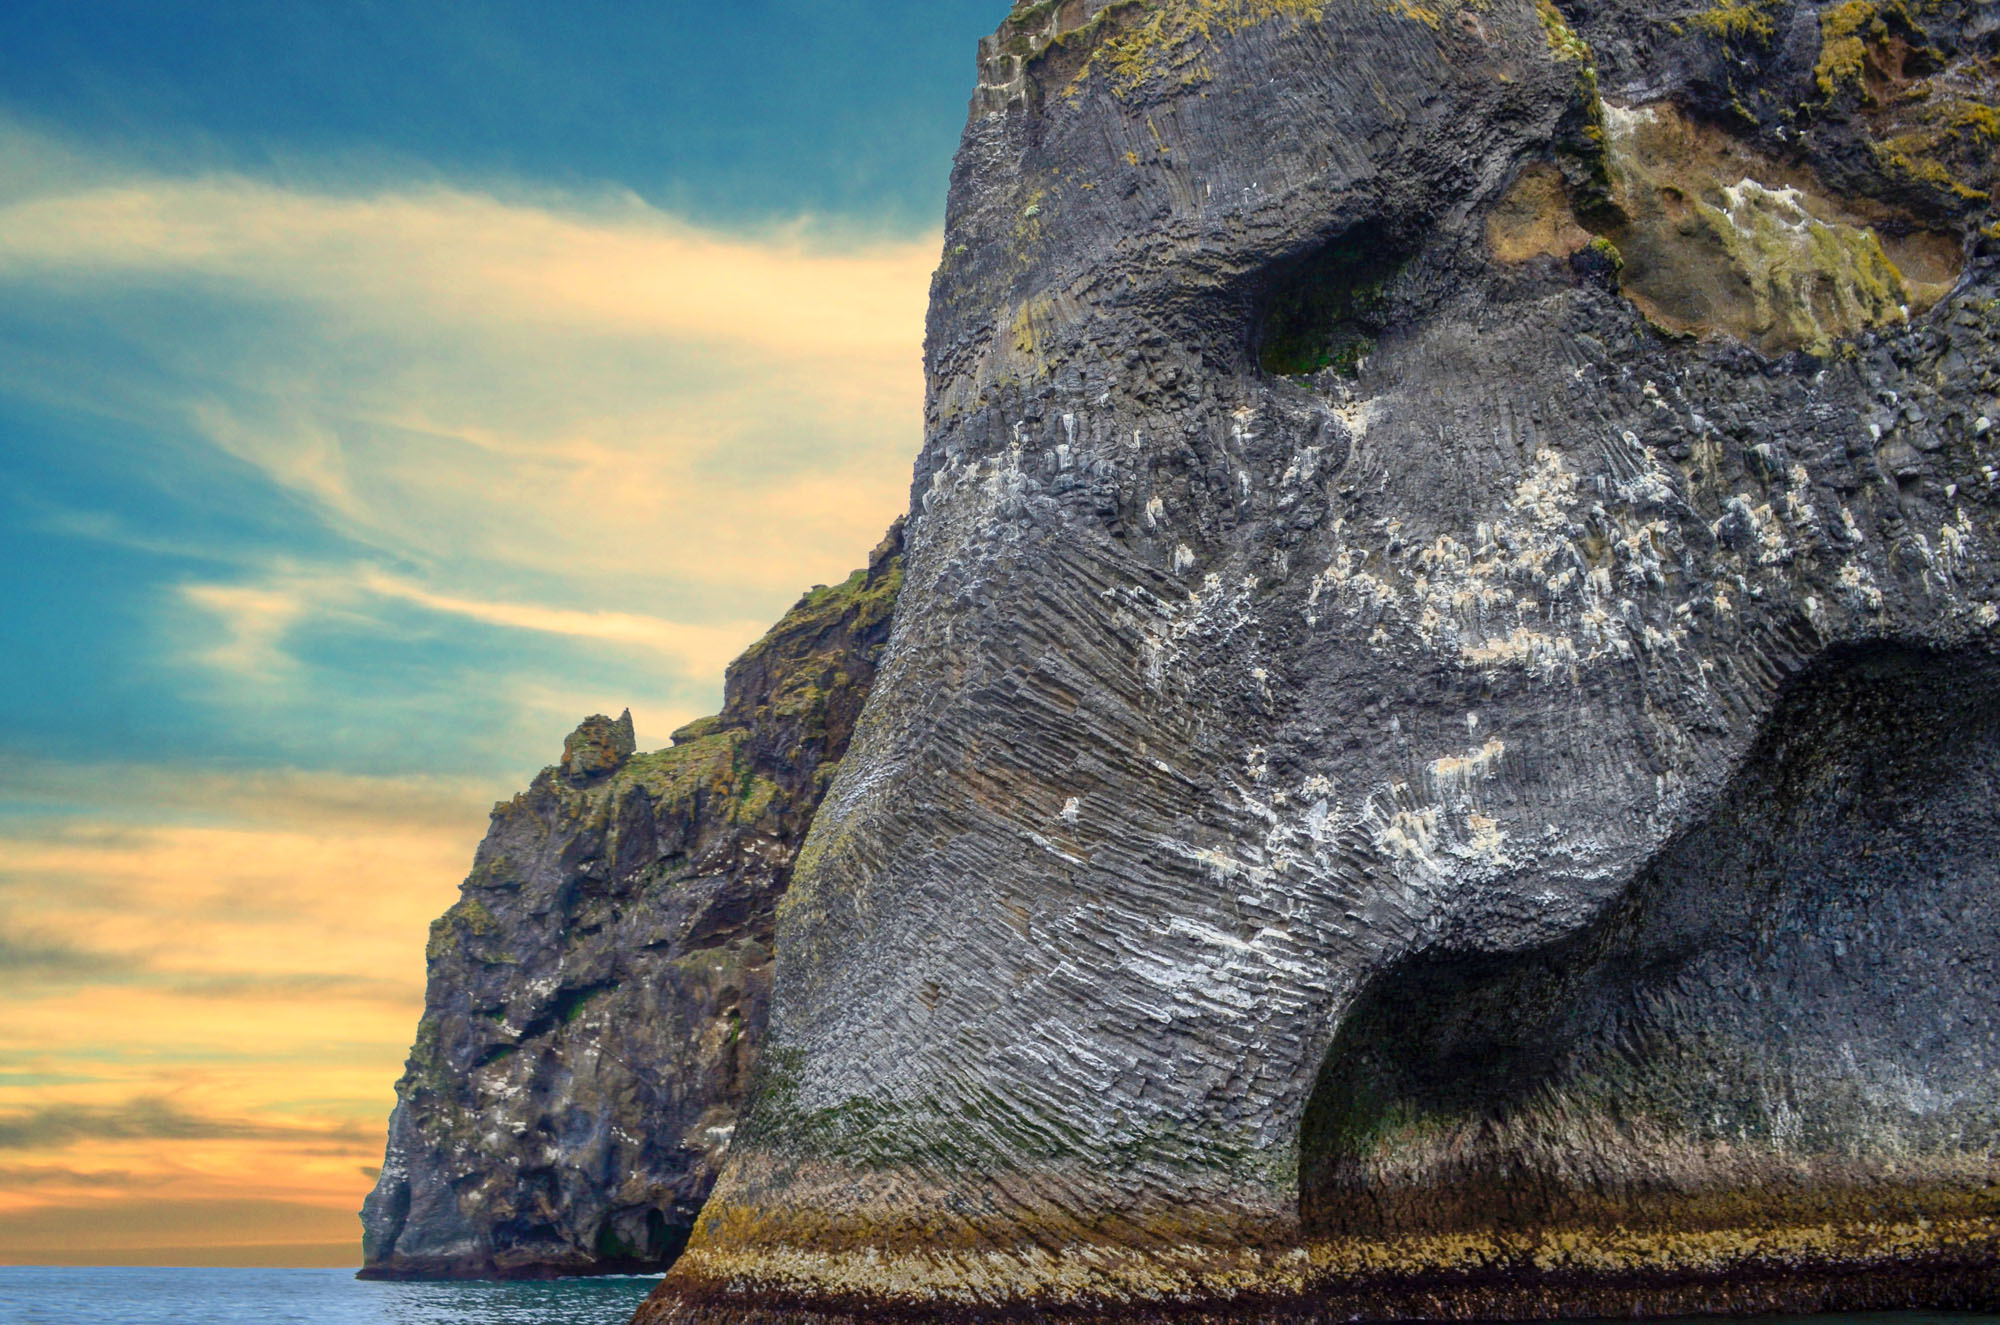 This natural rock formation looks a lot like an elephant and it's also home to many bird species.